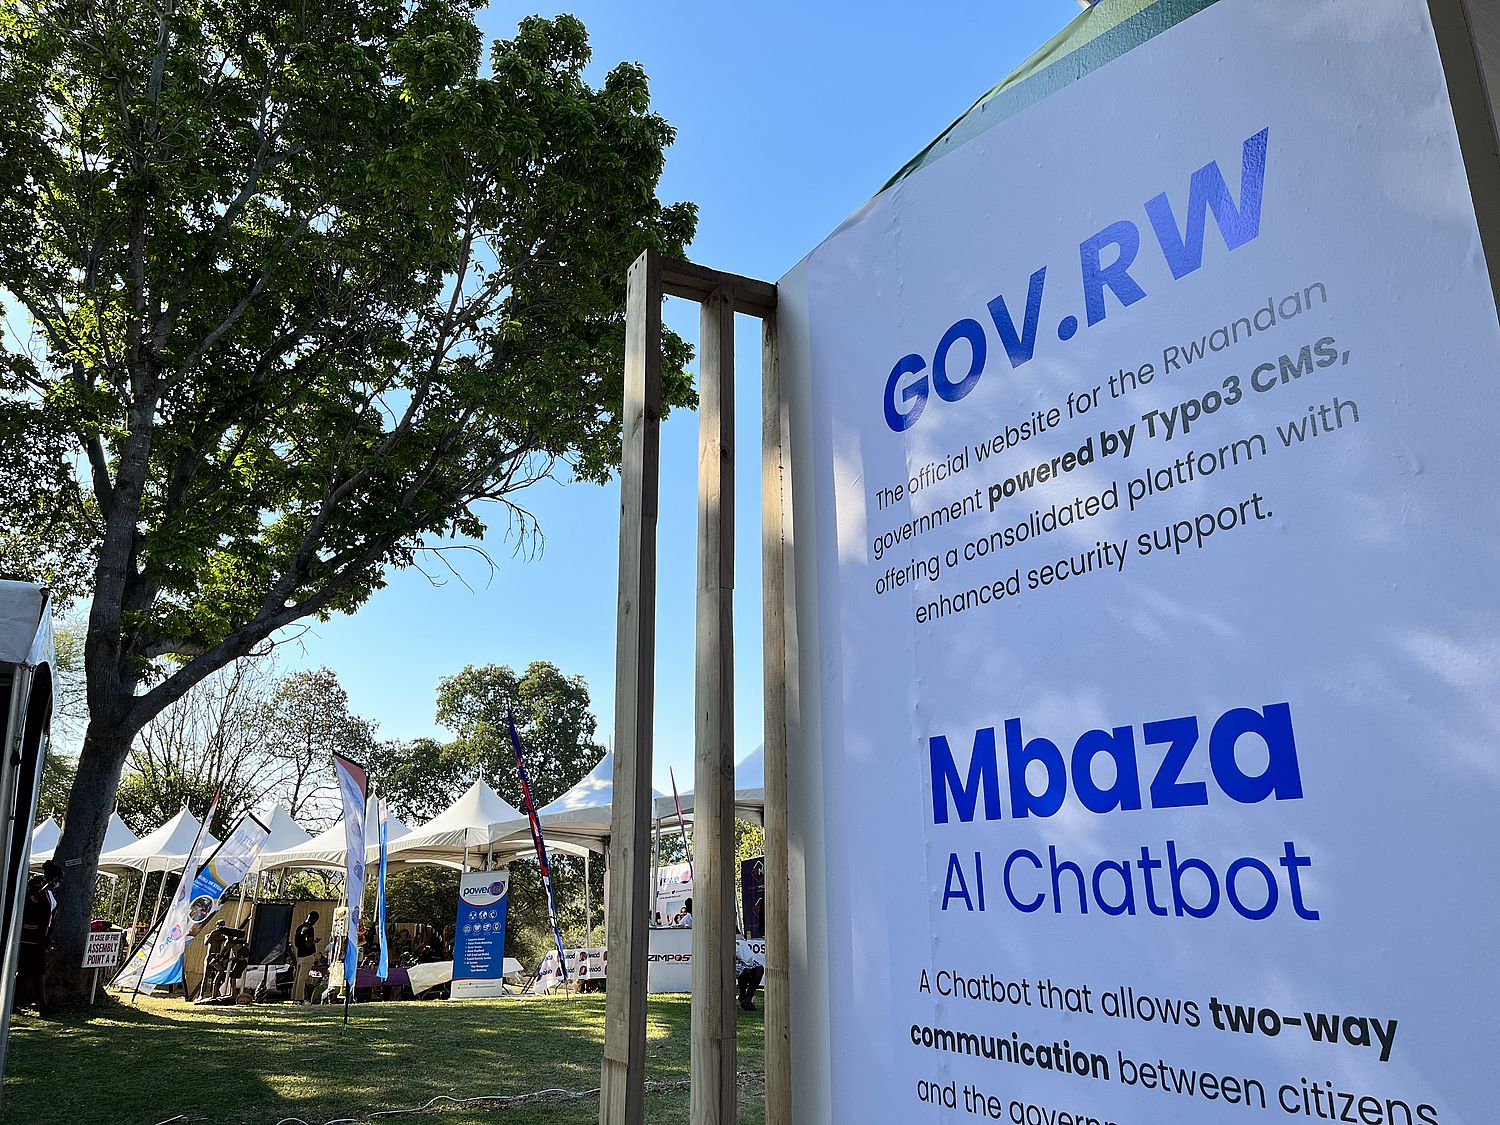 White vertical banner with "gov.rw" in an outdoor setting with trees.